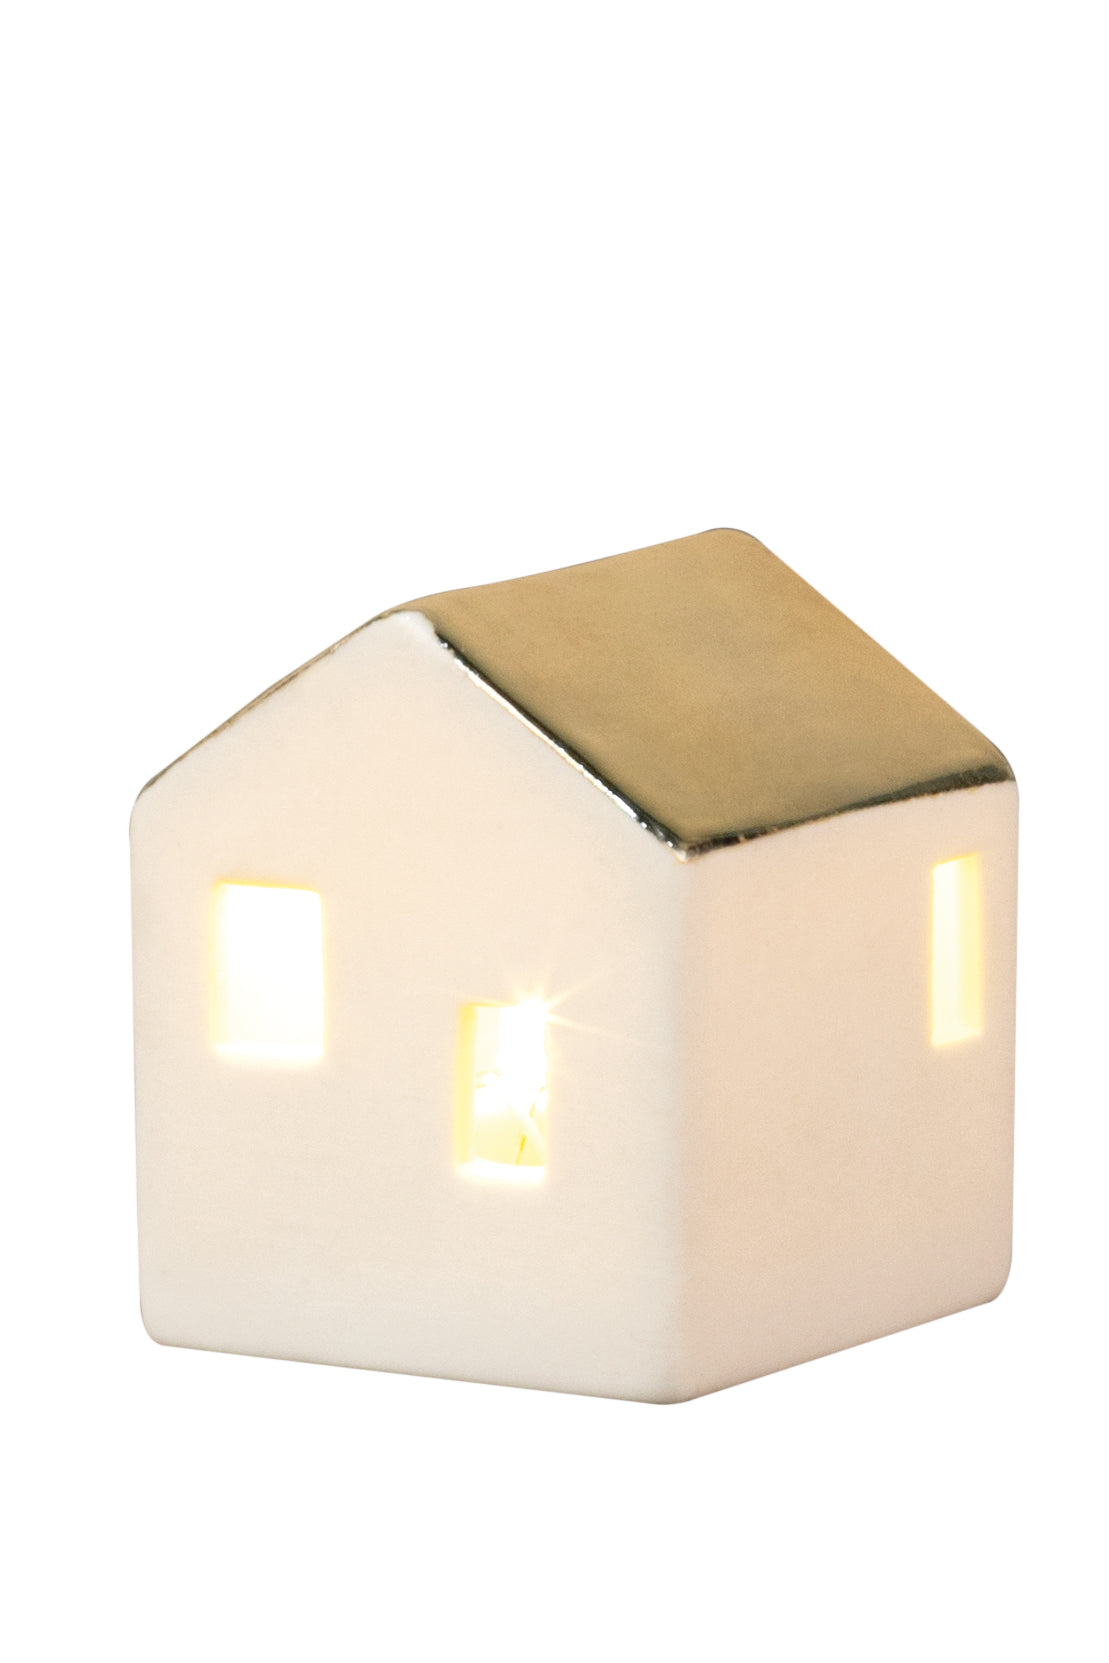 LED Light House with Gold Roof